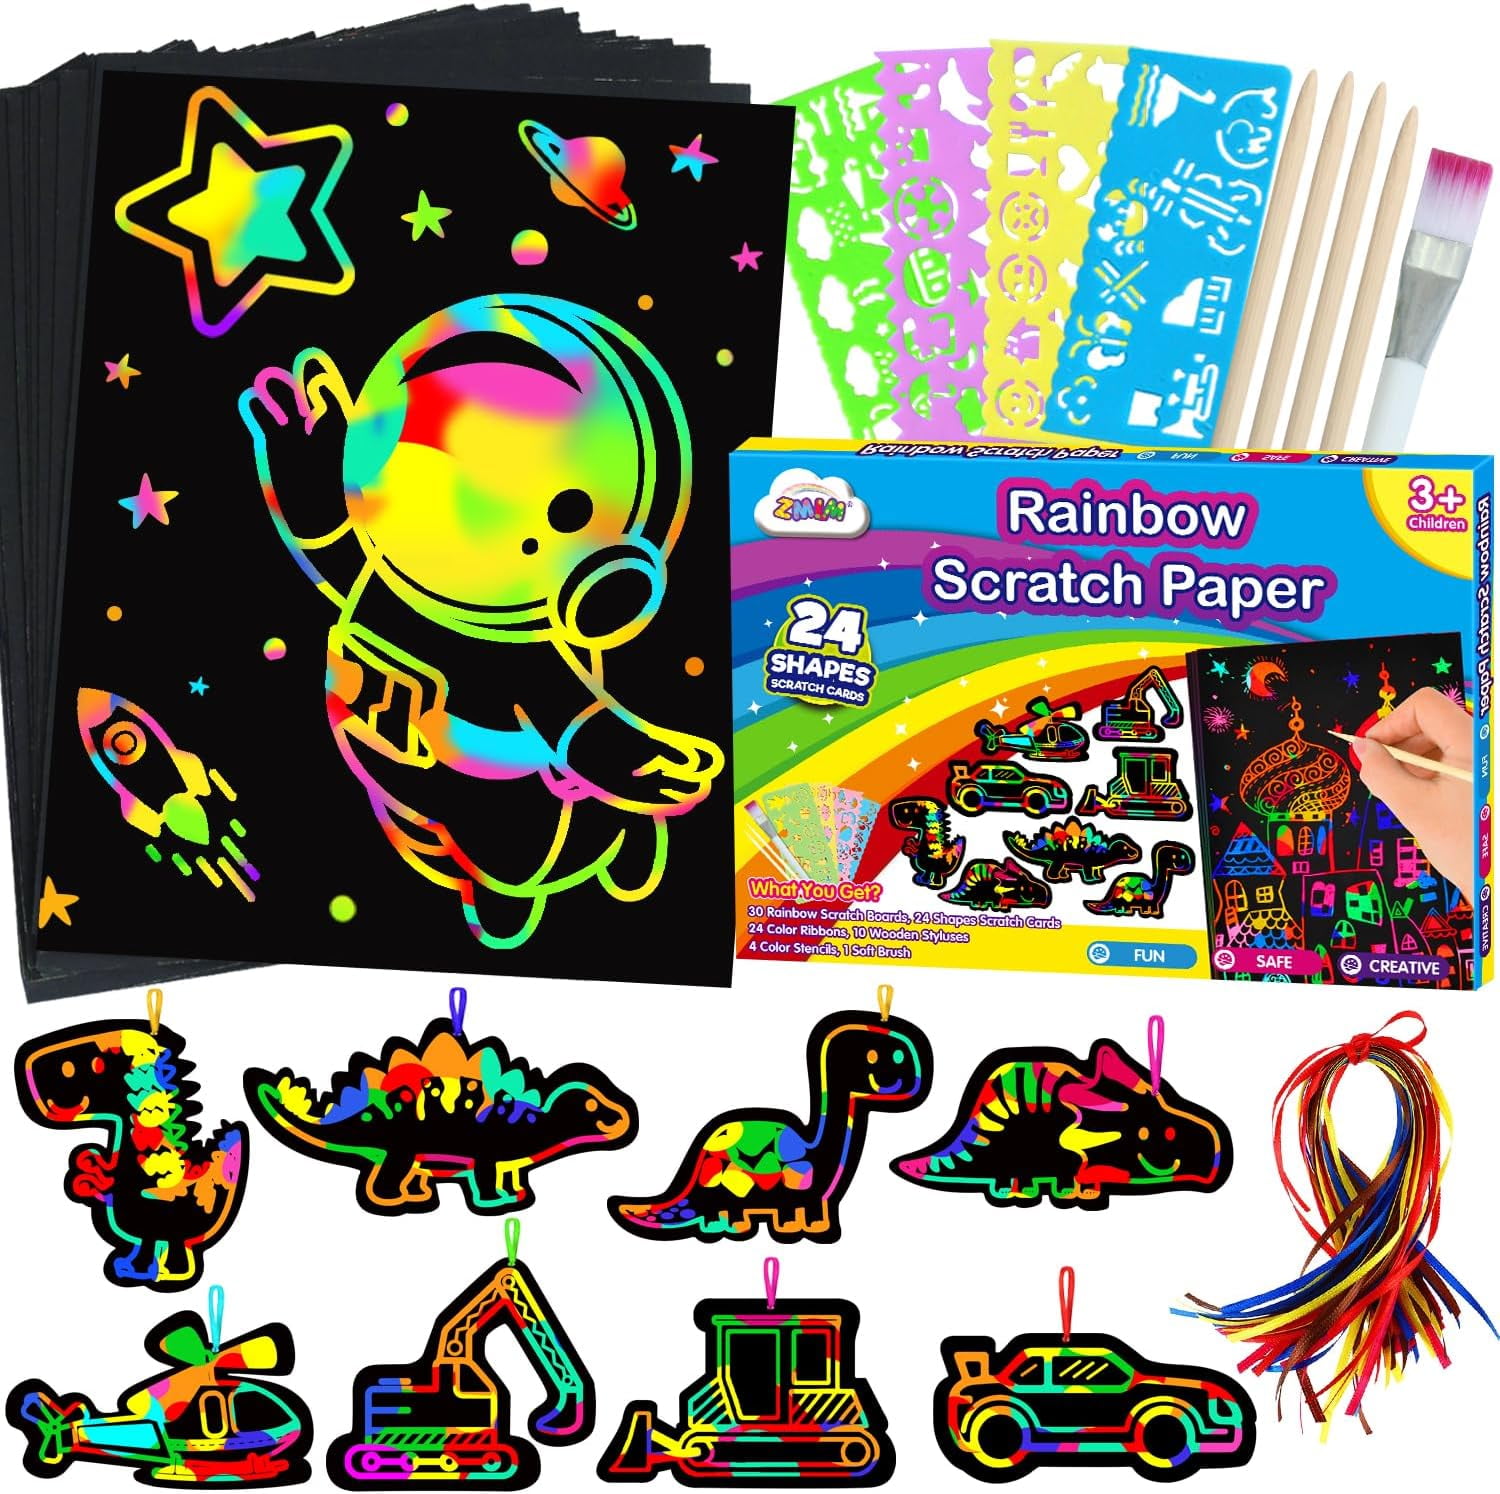 ZMLM Scratch Paper Art Set for Kids: Rainbow Magic Scratch Art Craft  Supplies Kit Birthday Party Toy 9 10 Year Old Boys Girls Gift Christmas  Holiday